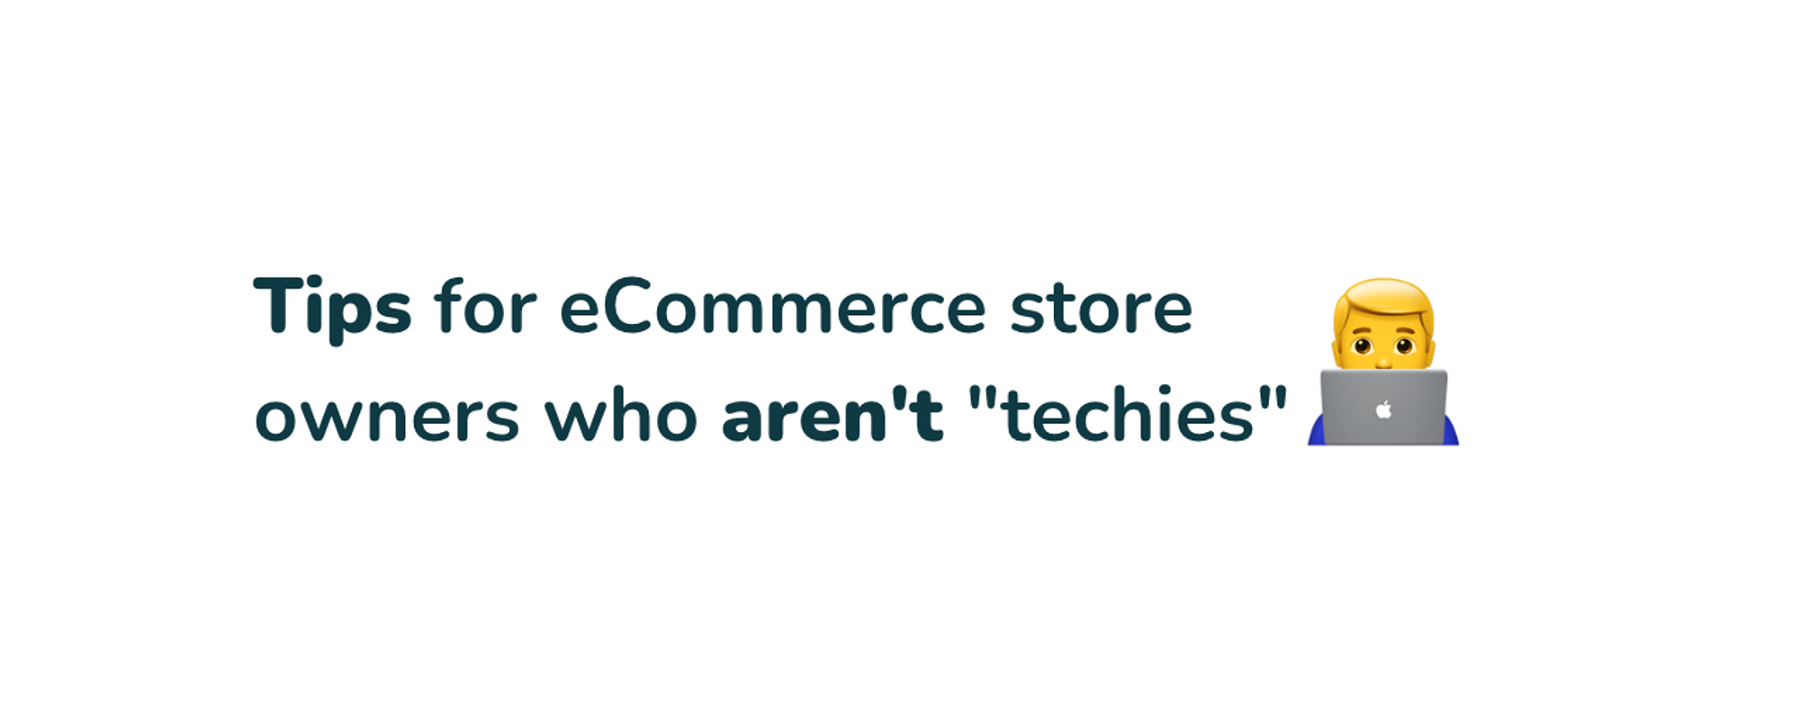 Tips for eCommerce store owners who aren’t “techies” 👨‍💻